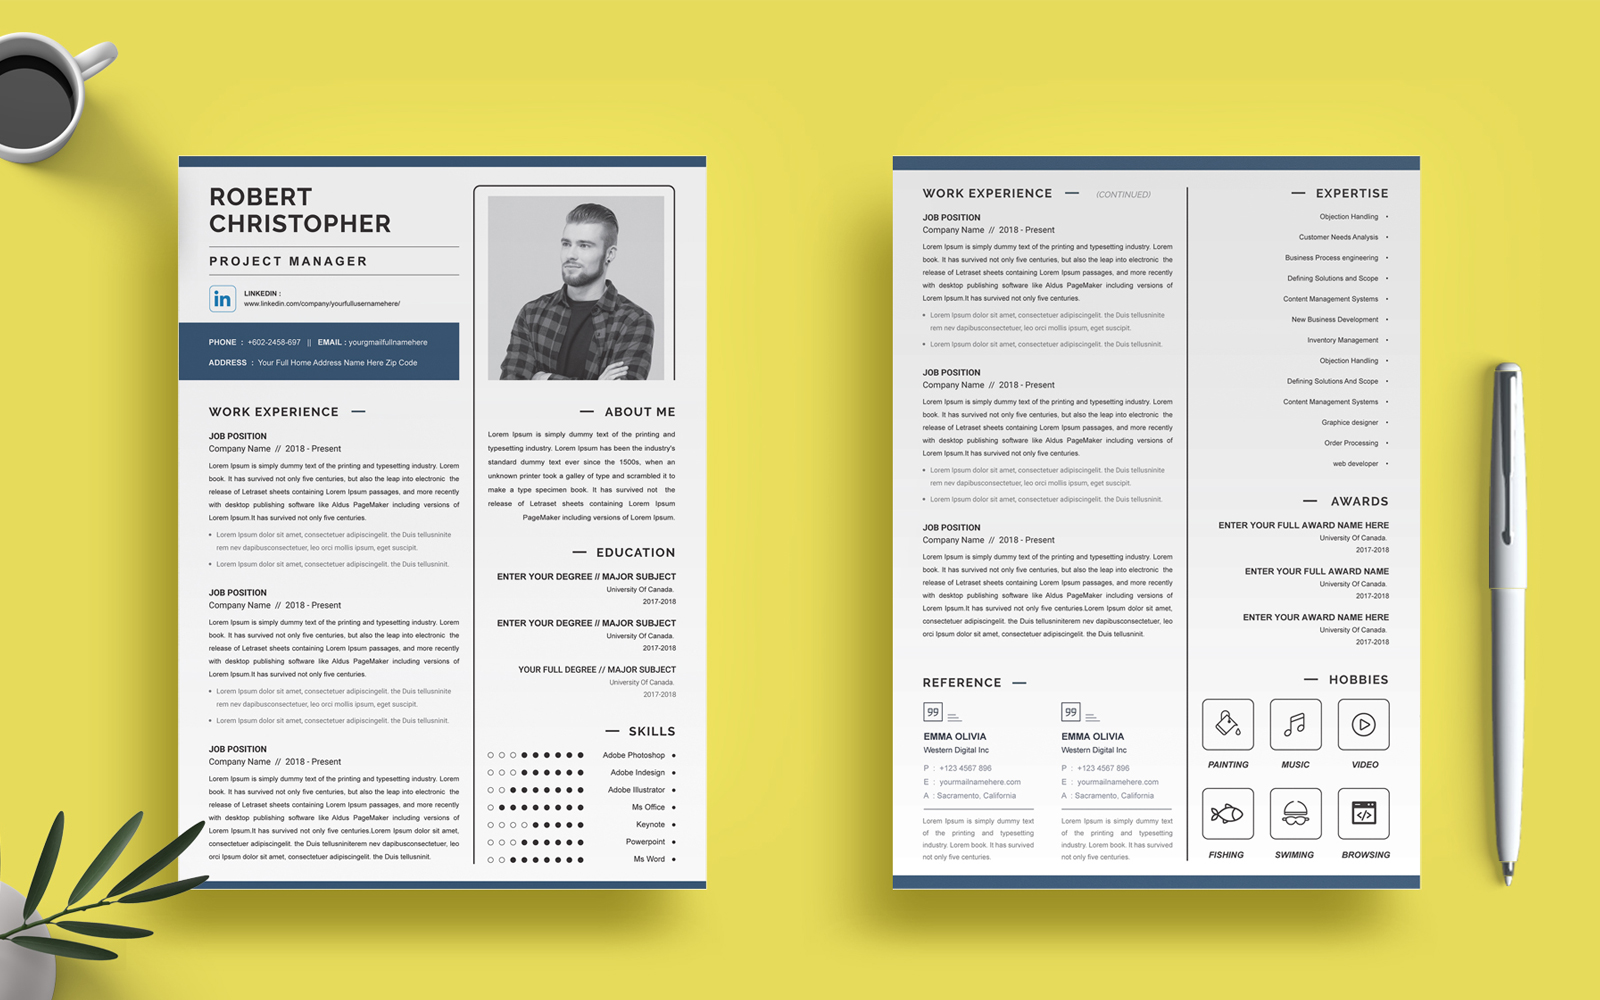 Robert Christopher - Project Manager Resume